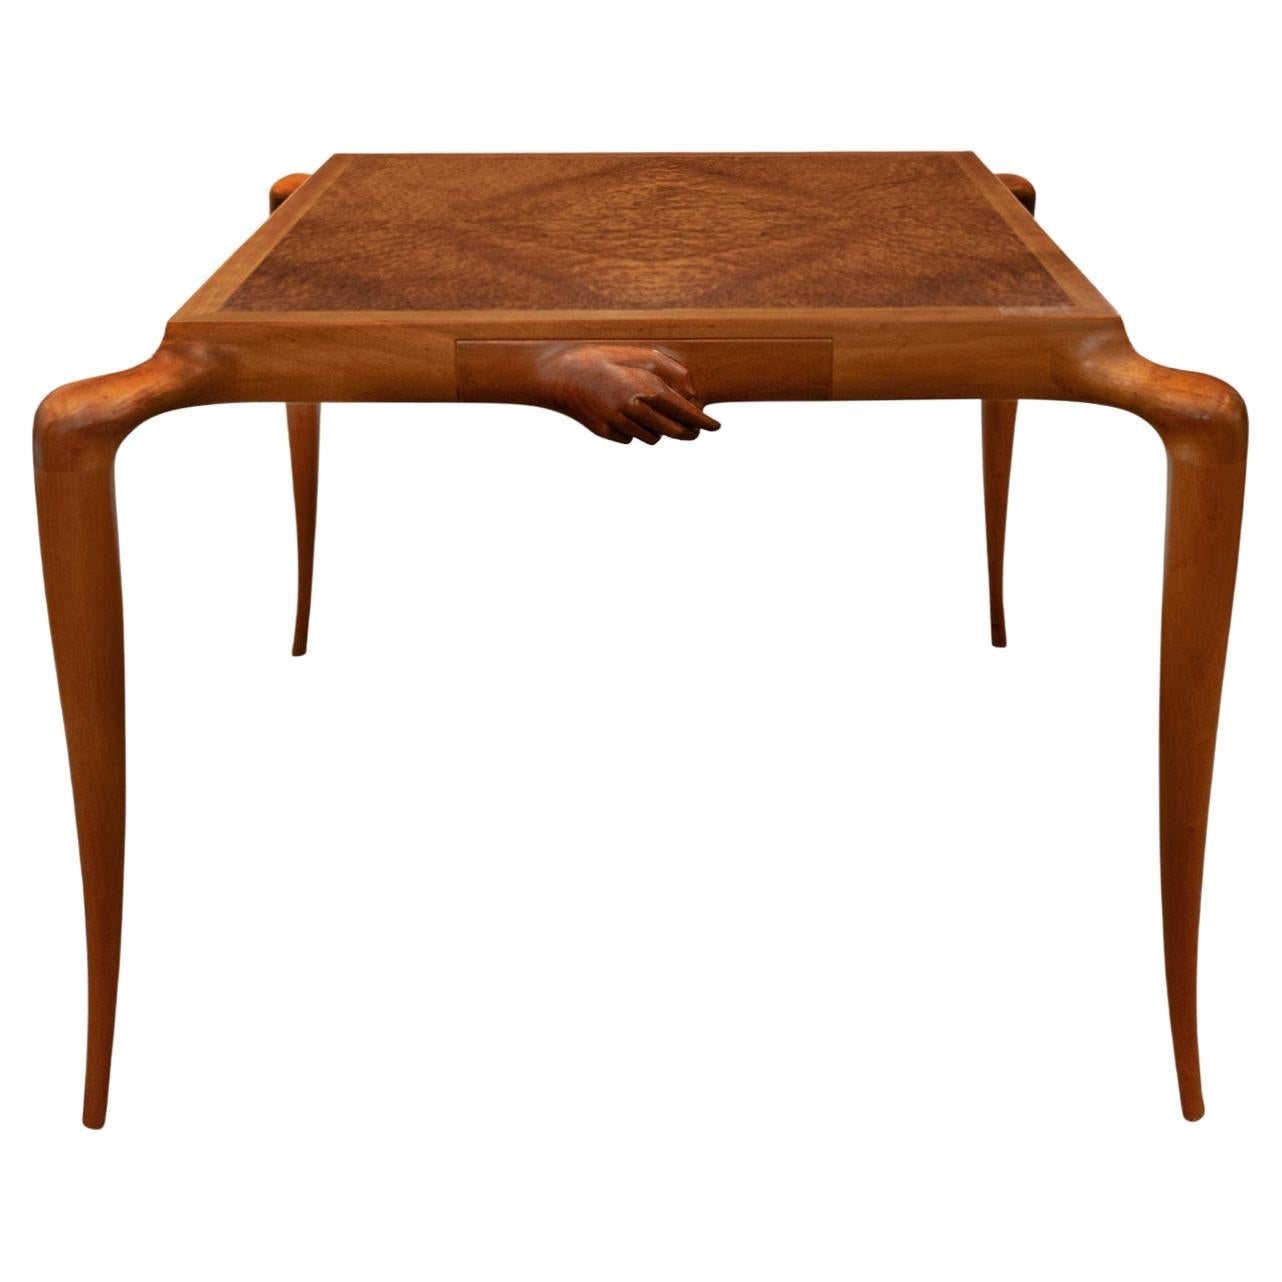 Philip LaVerne Important Sculpture Game Table with Carved Hands 1966, 'Signed'